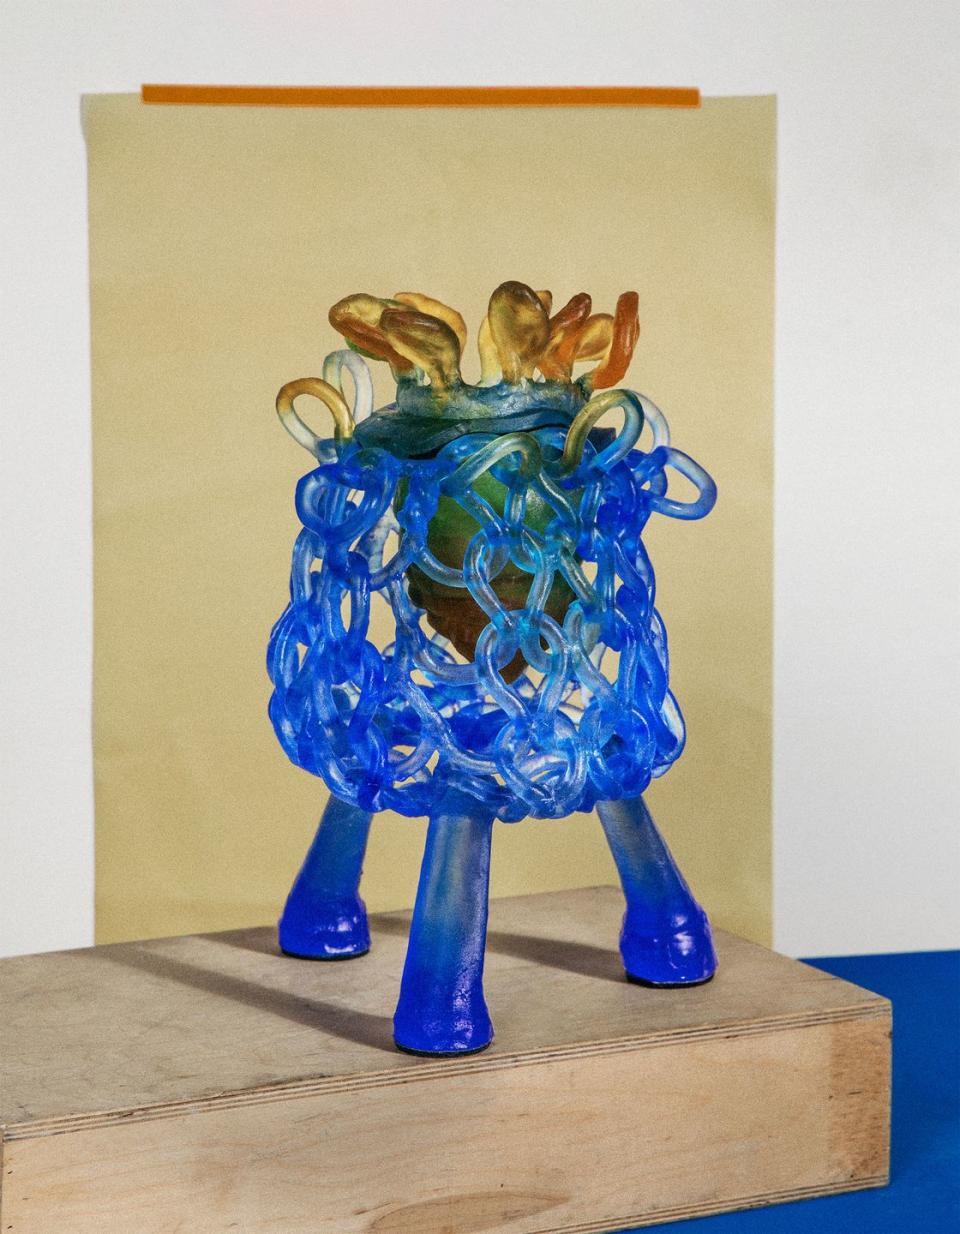 abstract blue glass loopy vase on raised feet with brownish tendrils that look like flowers